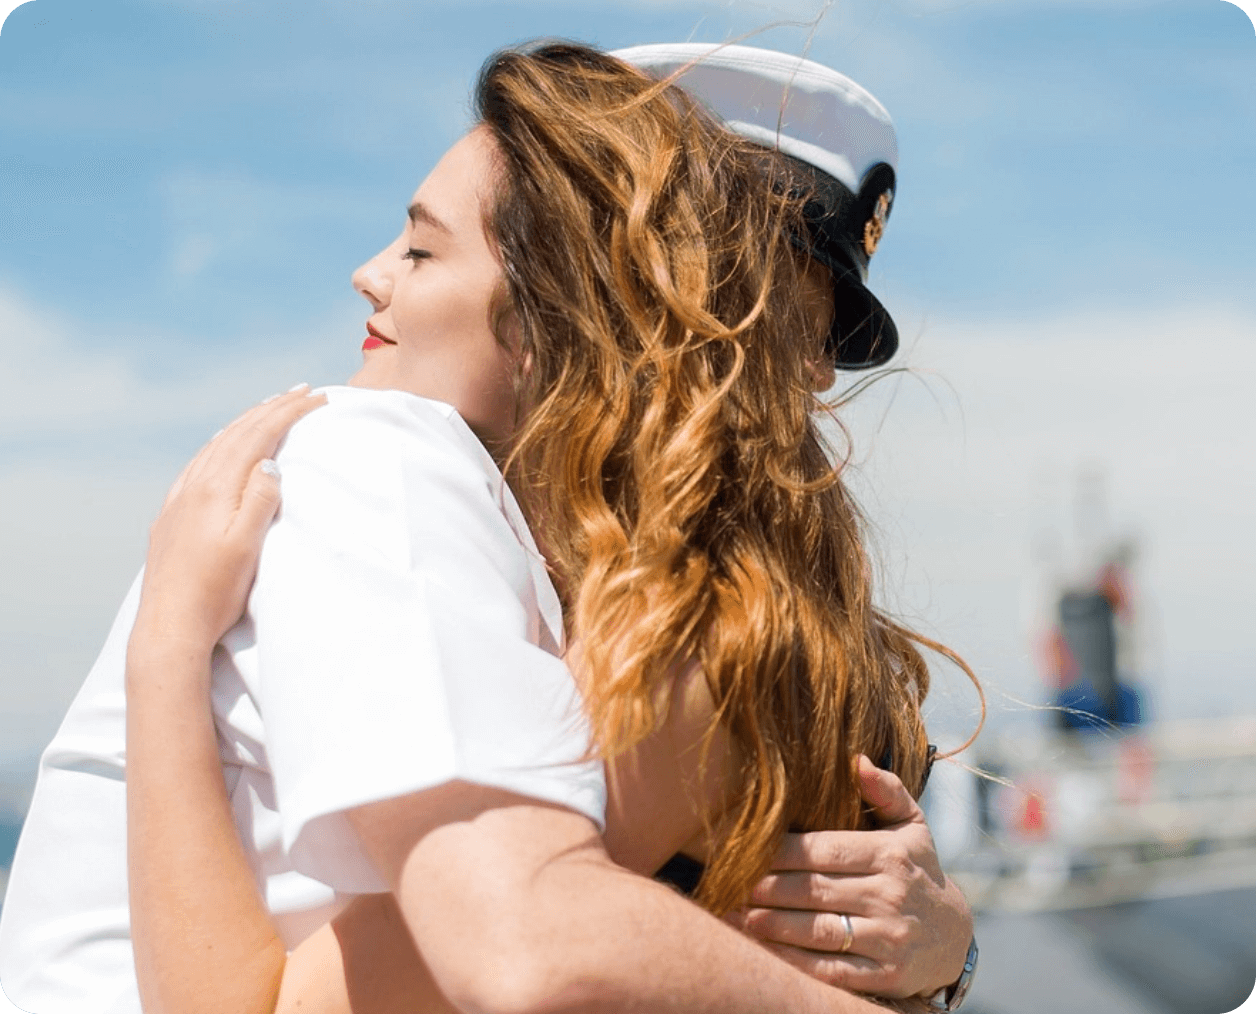 sailor hugging wife at the veterans recovery program